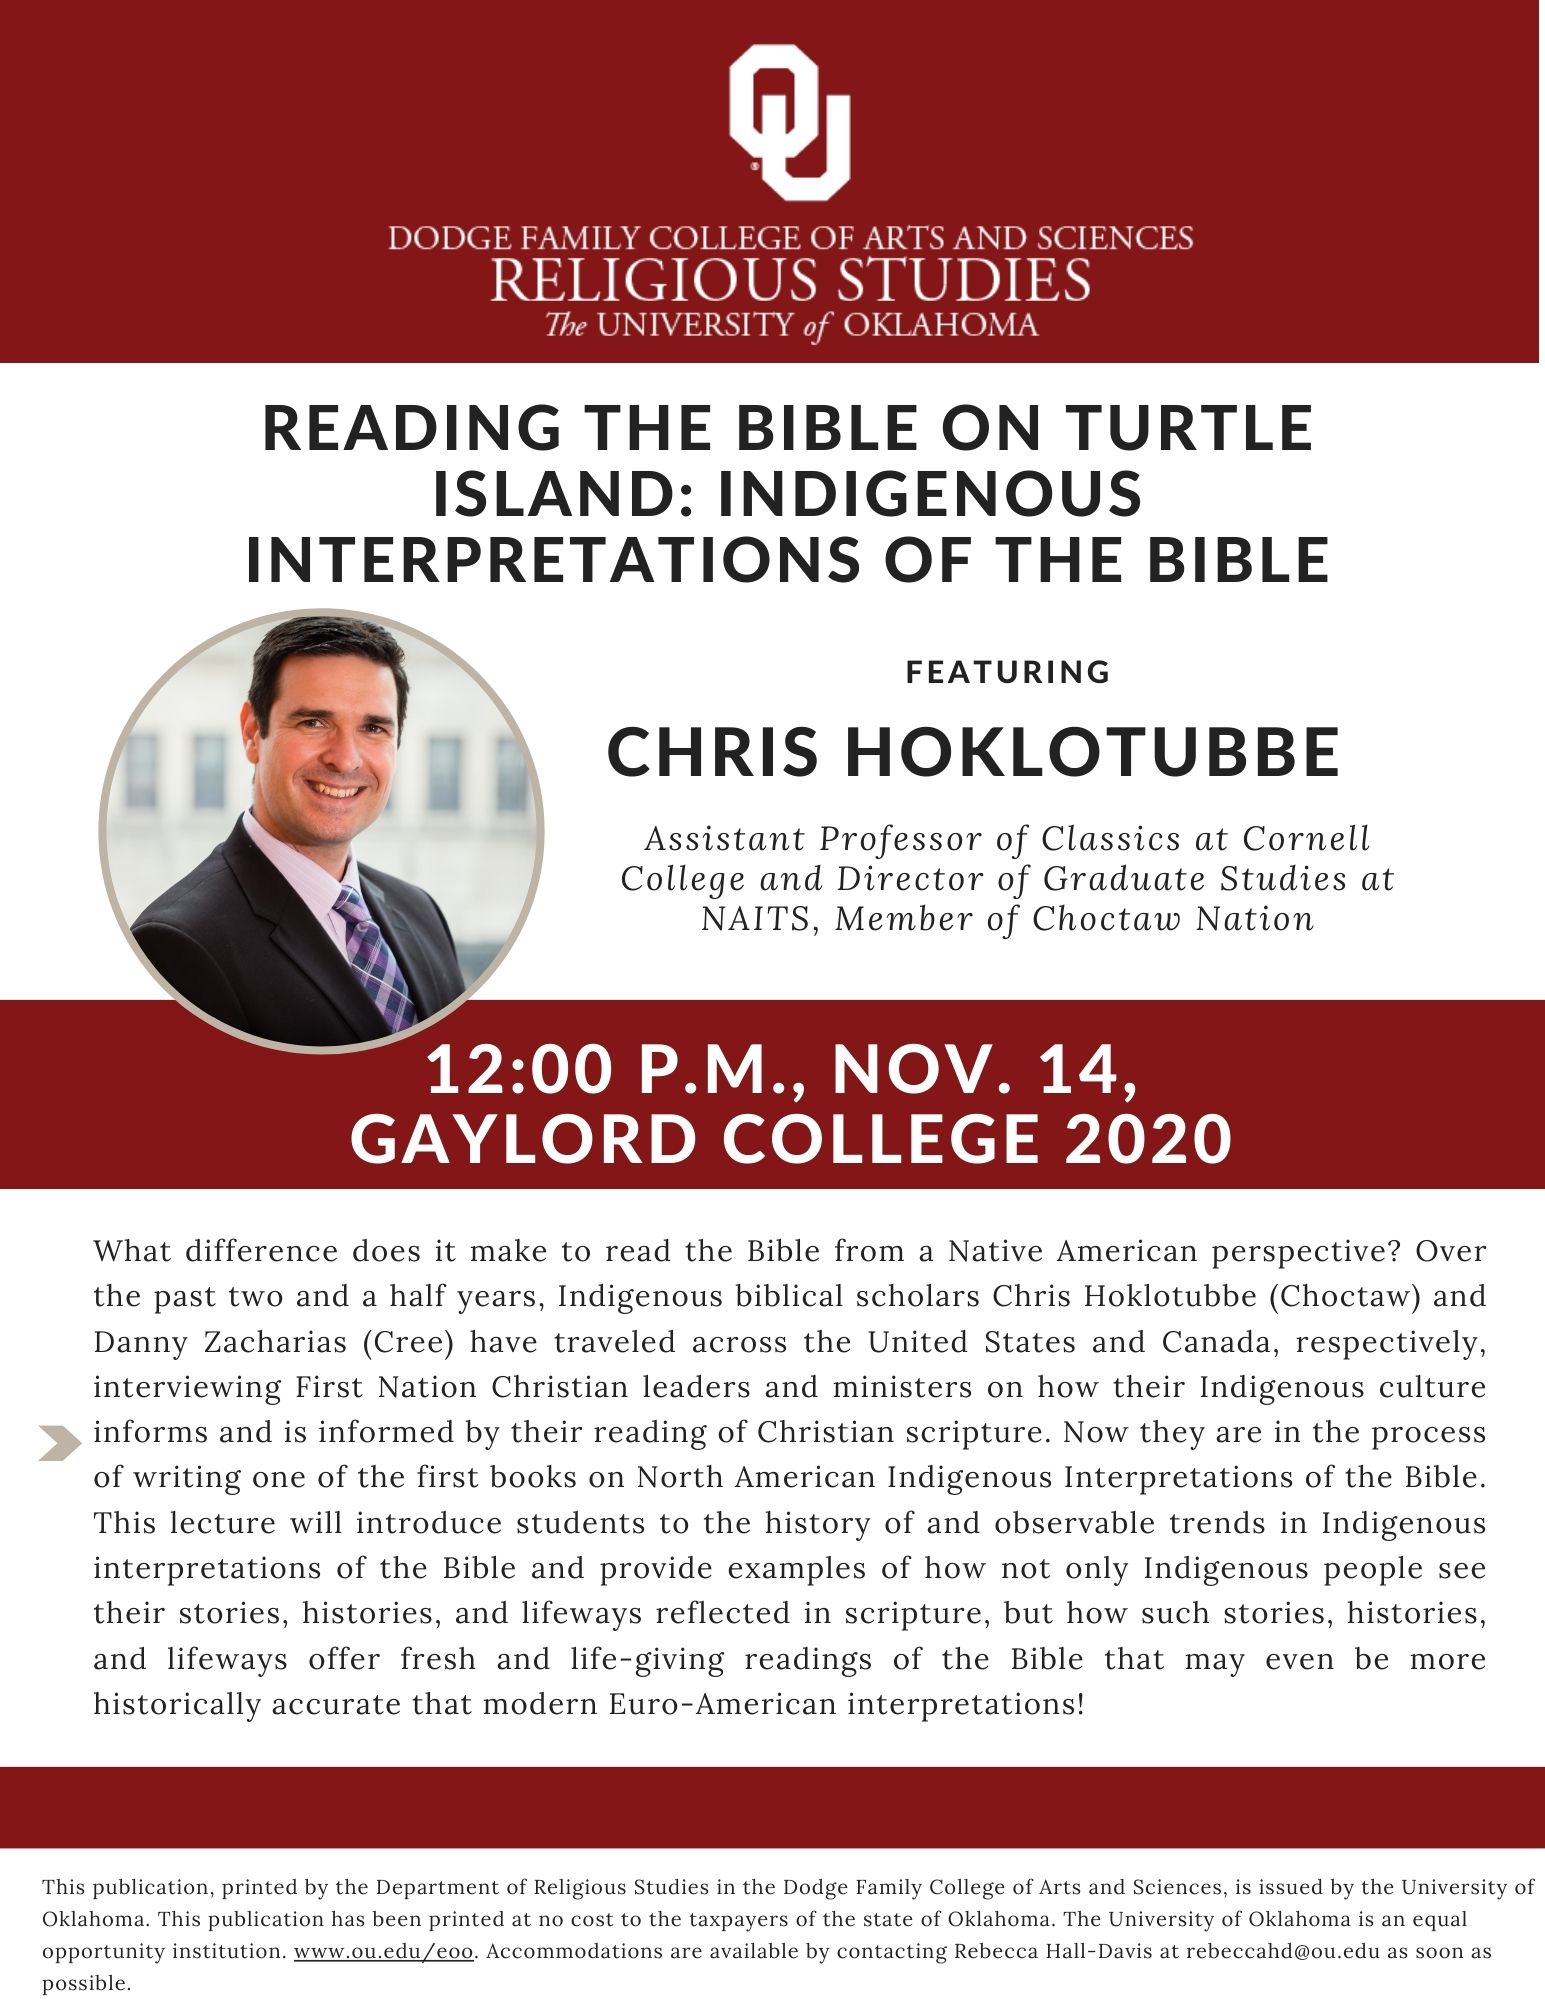 The Department of Religious Studies invites you to join us for a lecture with Chris Hoklotubbe, Ph.D., Assistant Professor of Classics at Cornell College and Director of Graduate Studies at NAITS, titled "Reading the Bible on Turtle Island: Indigenous Interpretations of the Bible" on Tues., Nov. 14, 2023 at noon in Gaylord College room 2020.   